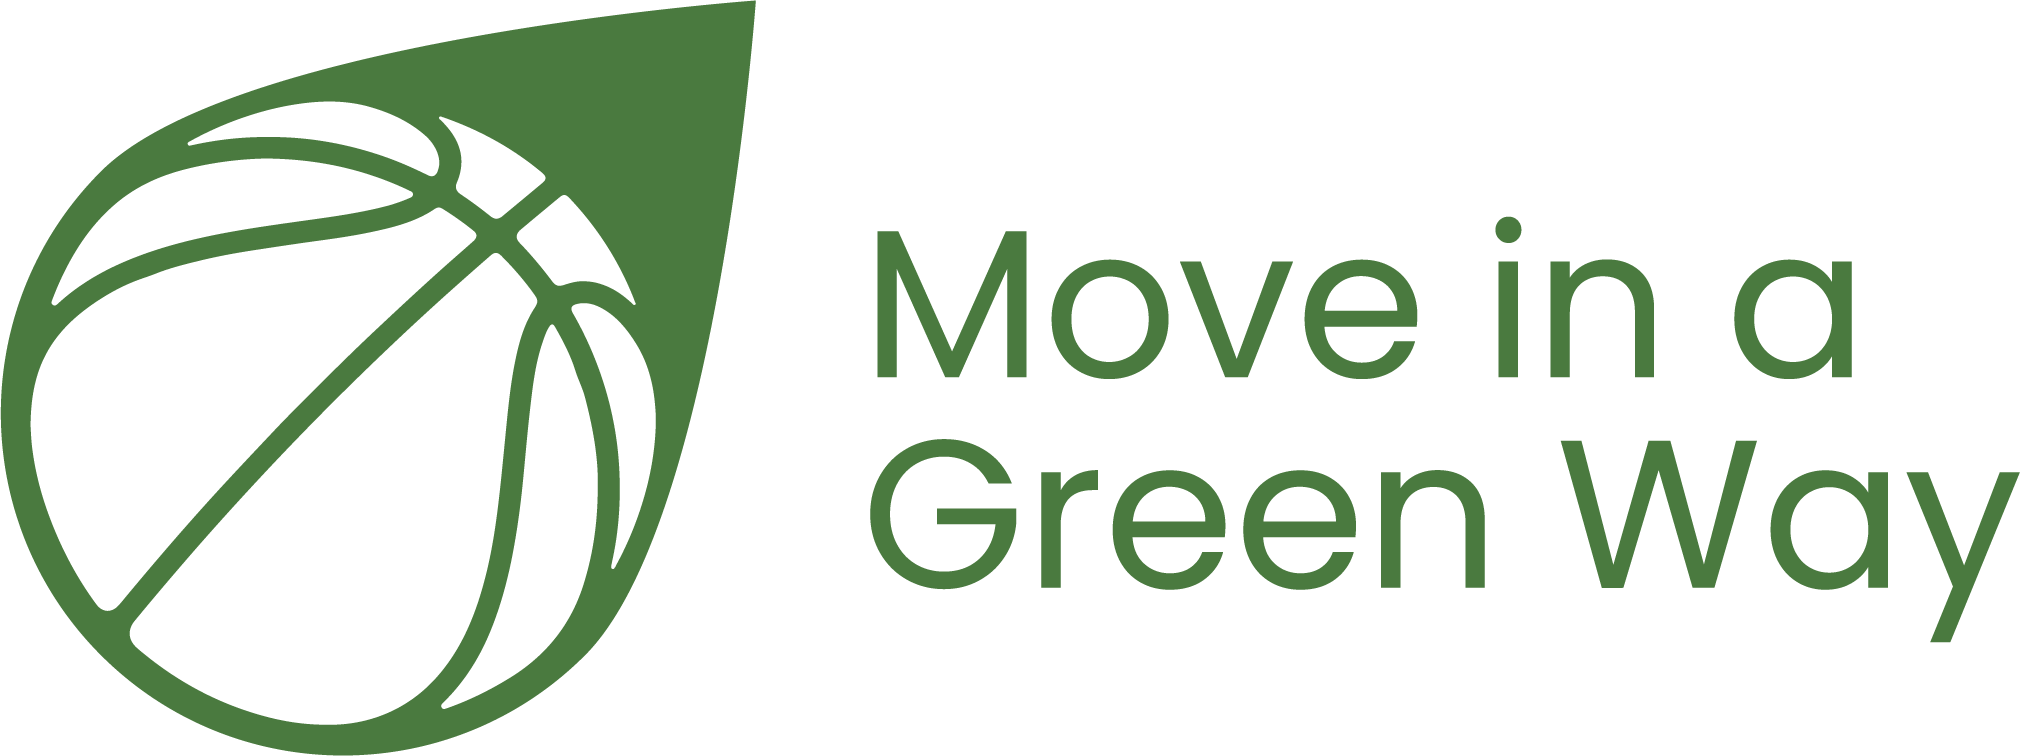 Move in a Green Way